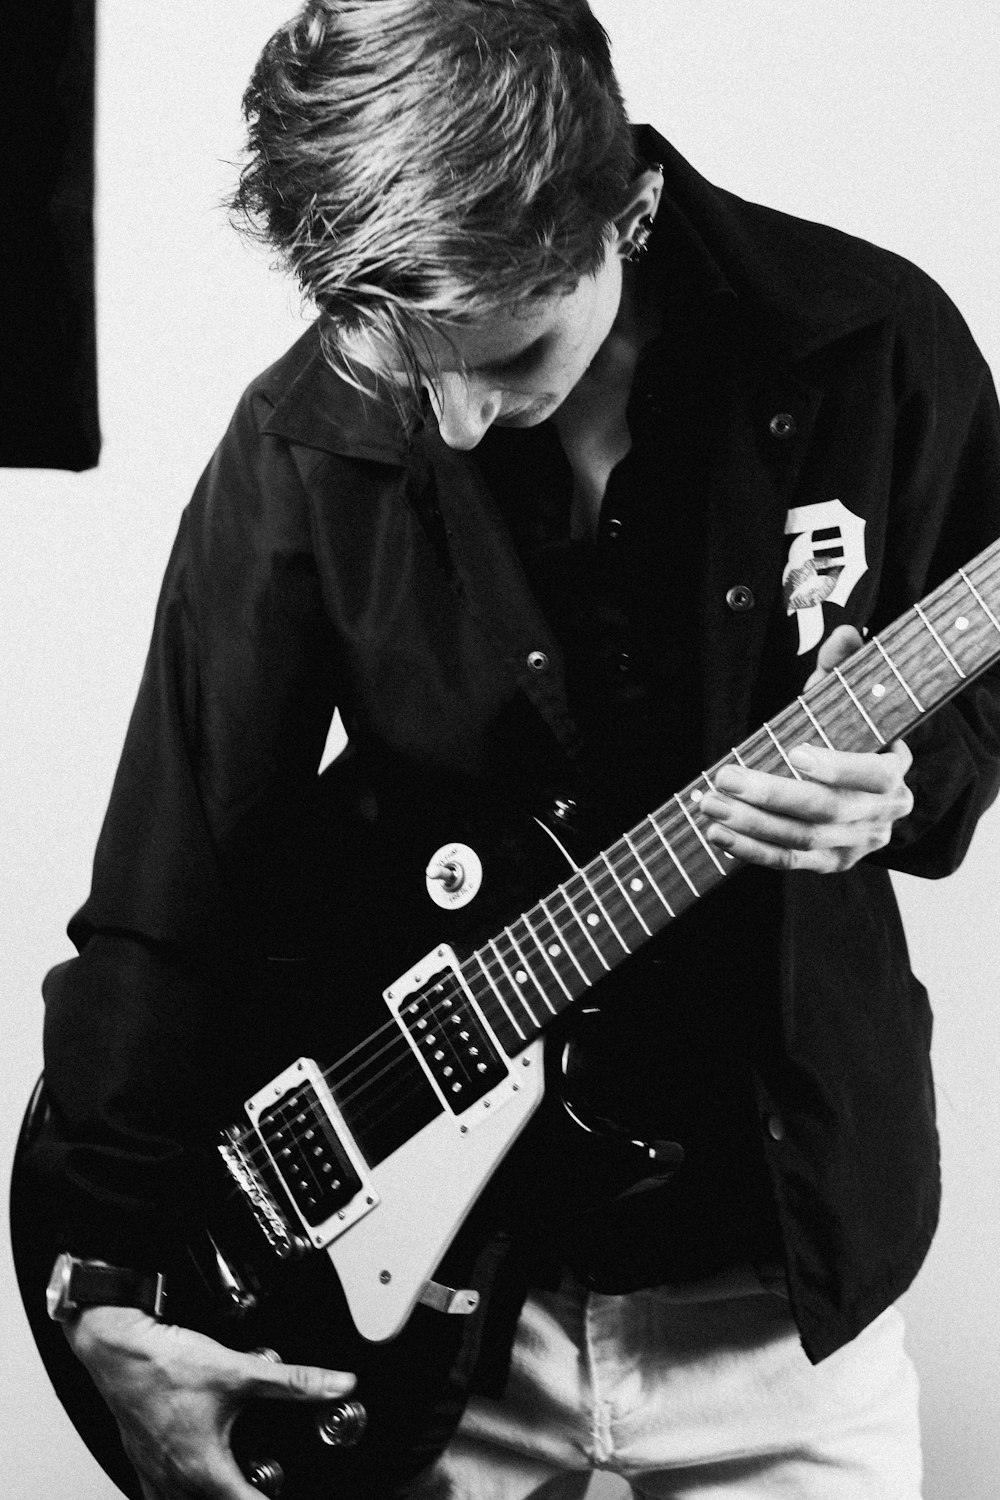 a black and white photo of a person playing a guitar